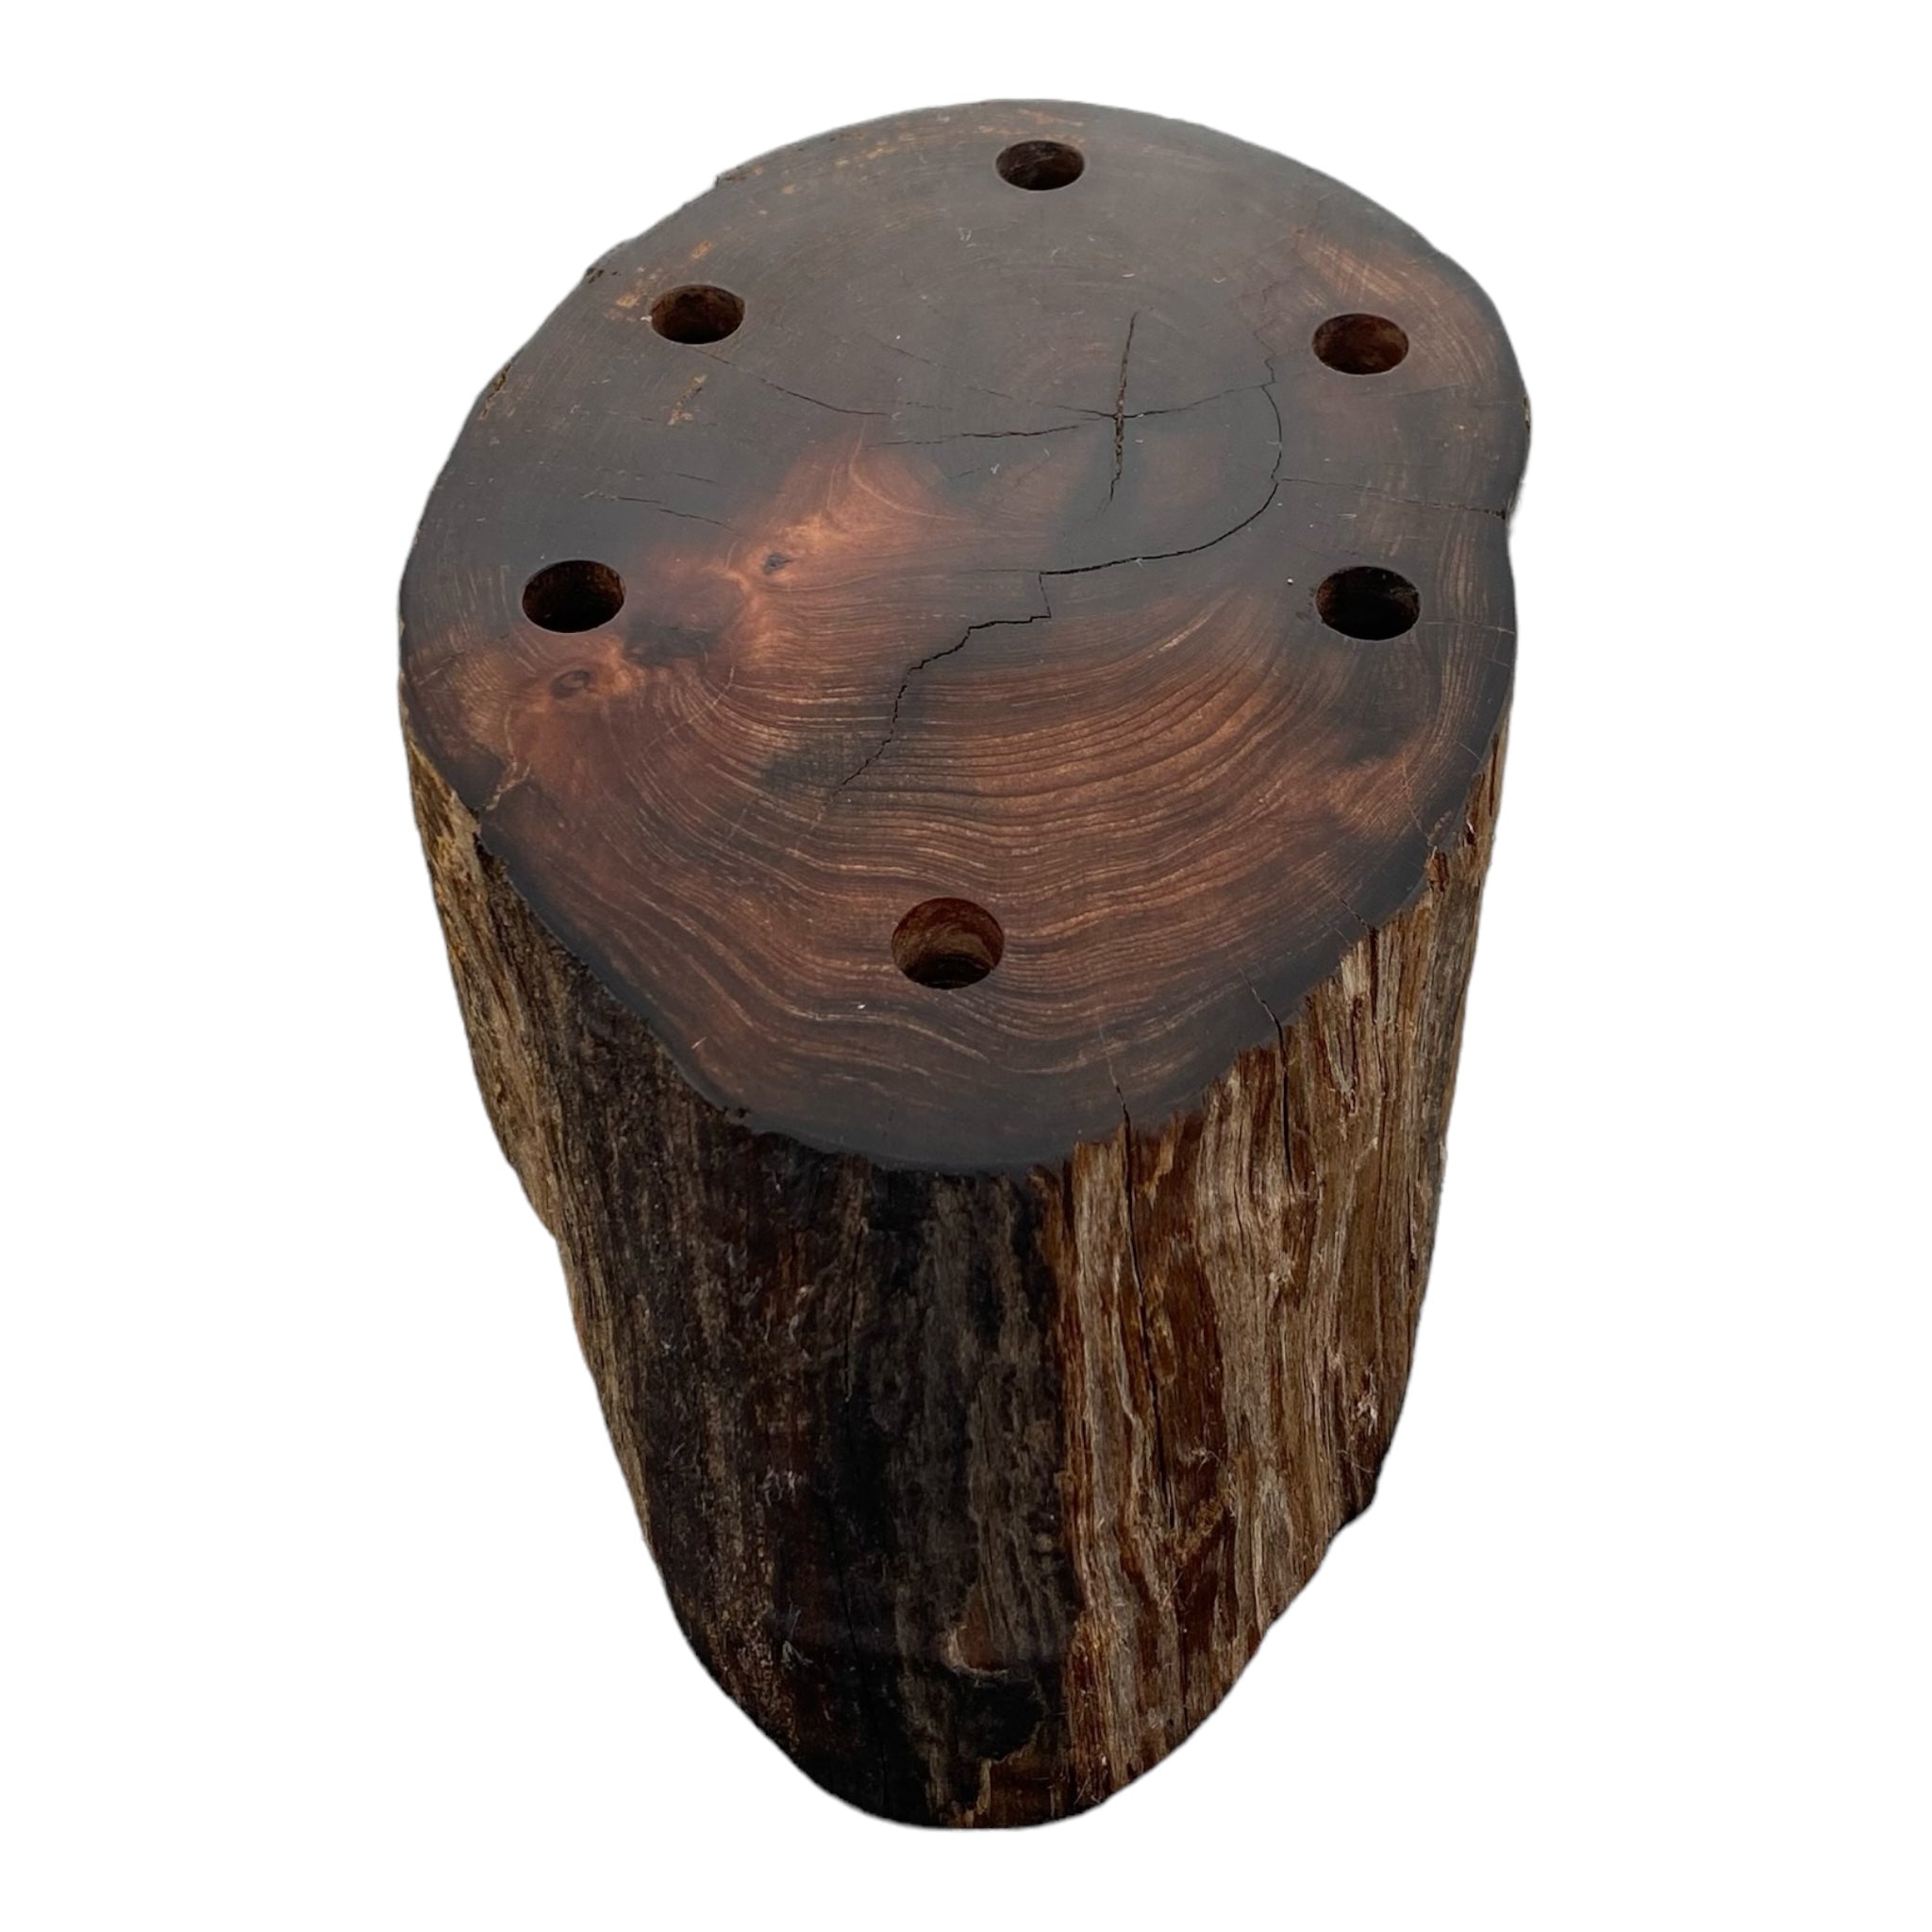 6 Hole Wood Display Stand Holder For 10mm Bong Bowl Pieces Or Quartz Bangers - Redwood Driftwood With Live Edge